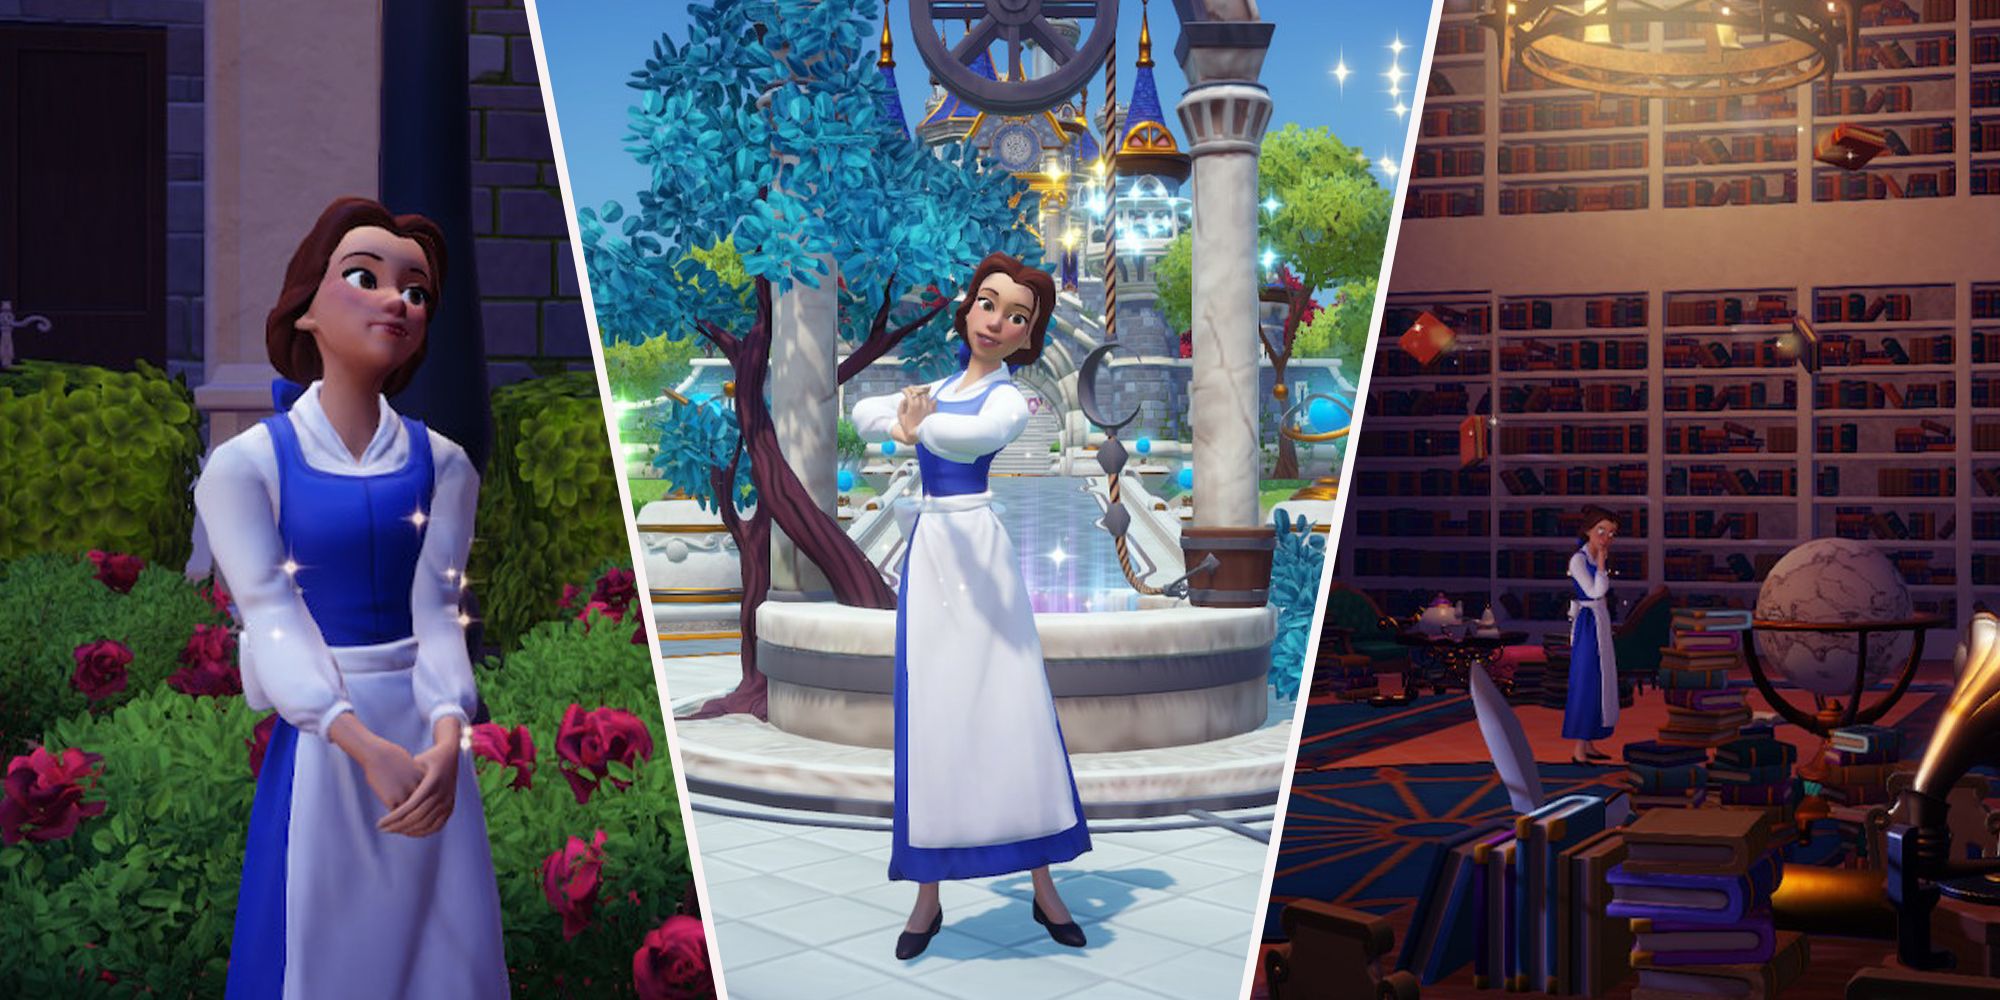 How To Unlock Belle From Beauty And The Beast In Disney Dreamlight Valley